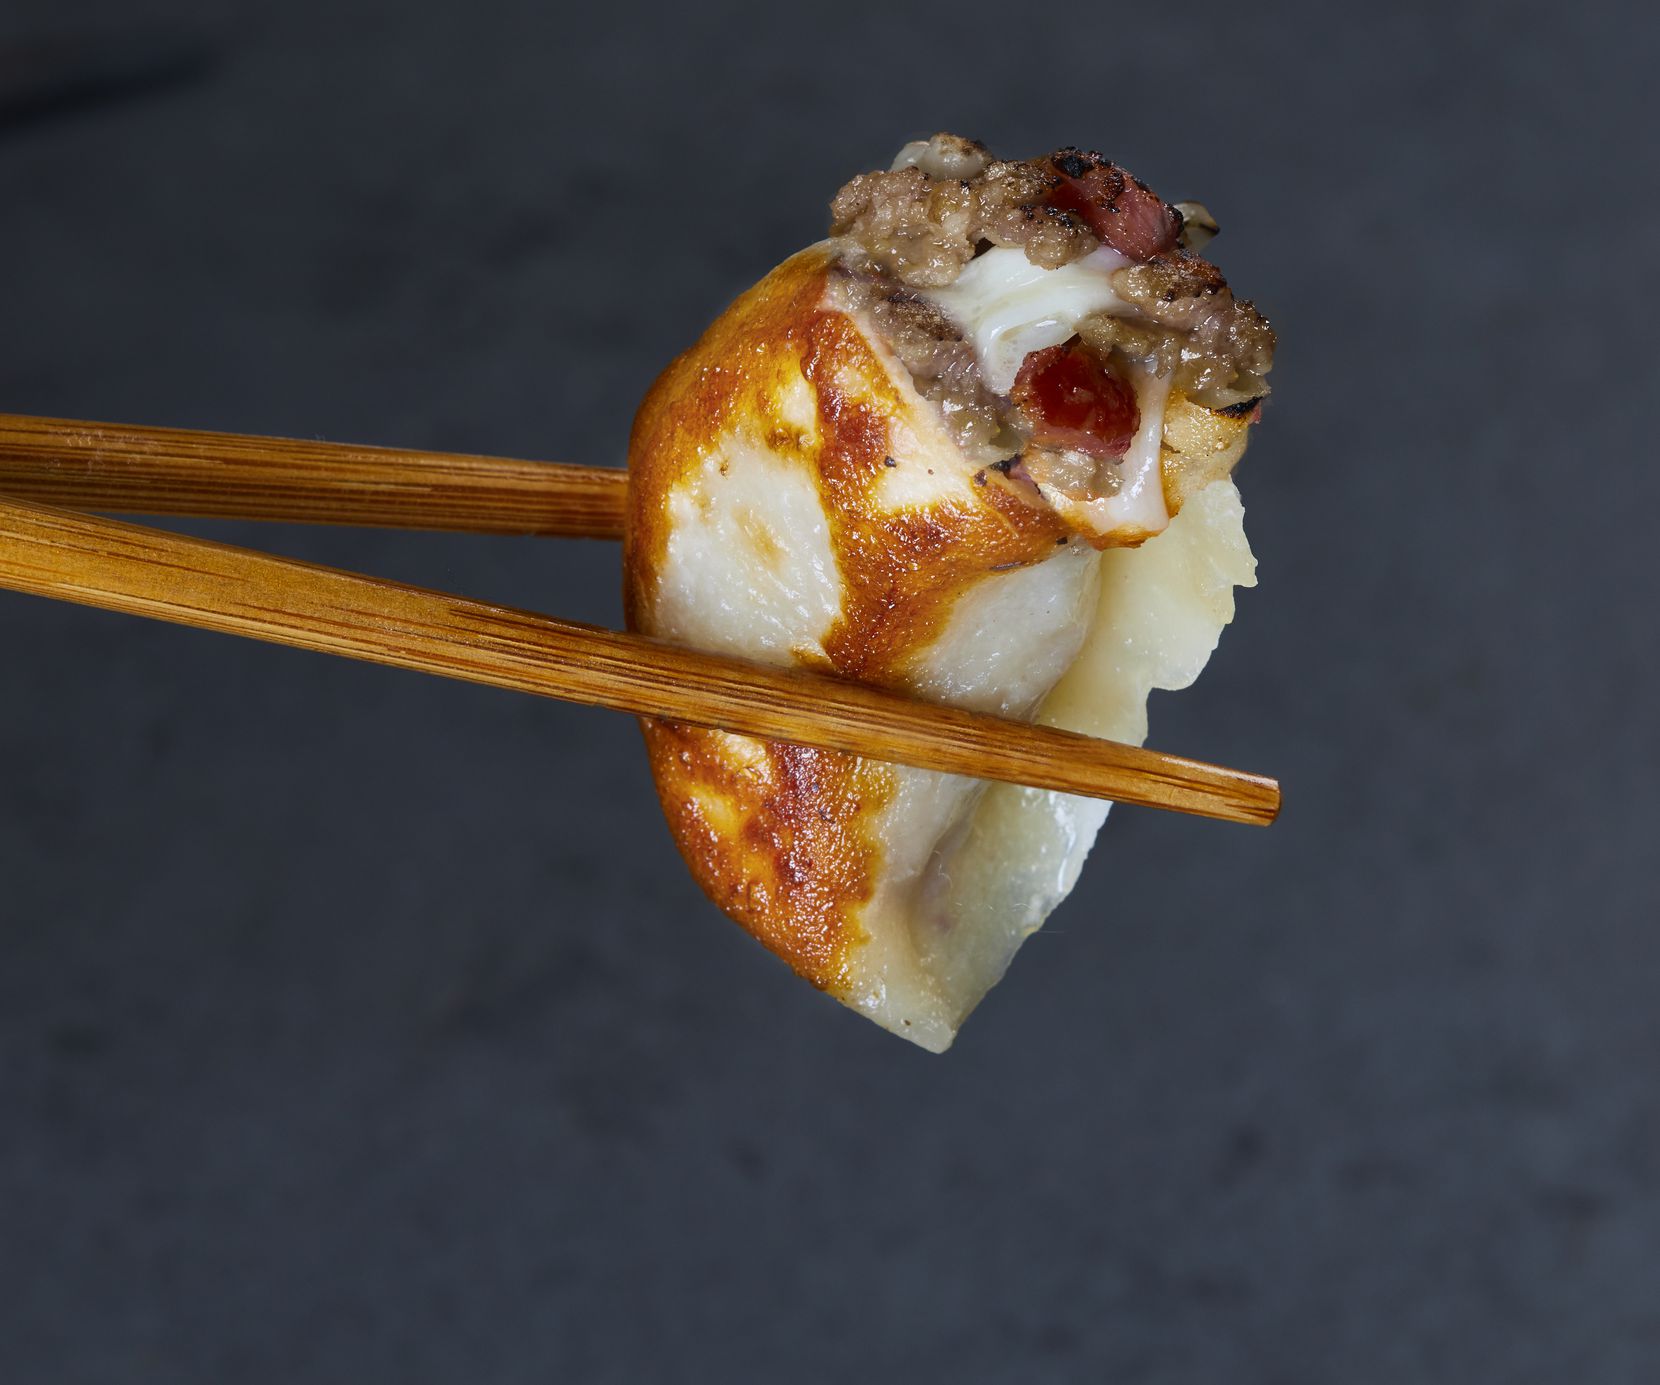 The bacon cheeseburger dumpling from Brooklyn Dumpling Shop is one of 32 varieties sold by the restaurant.